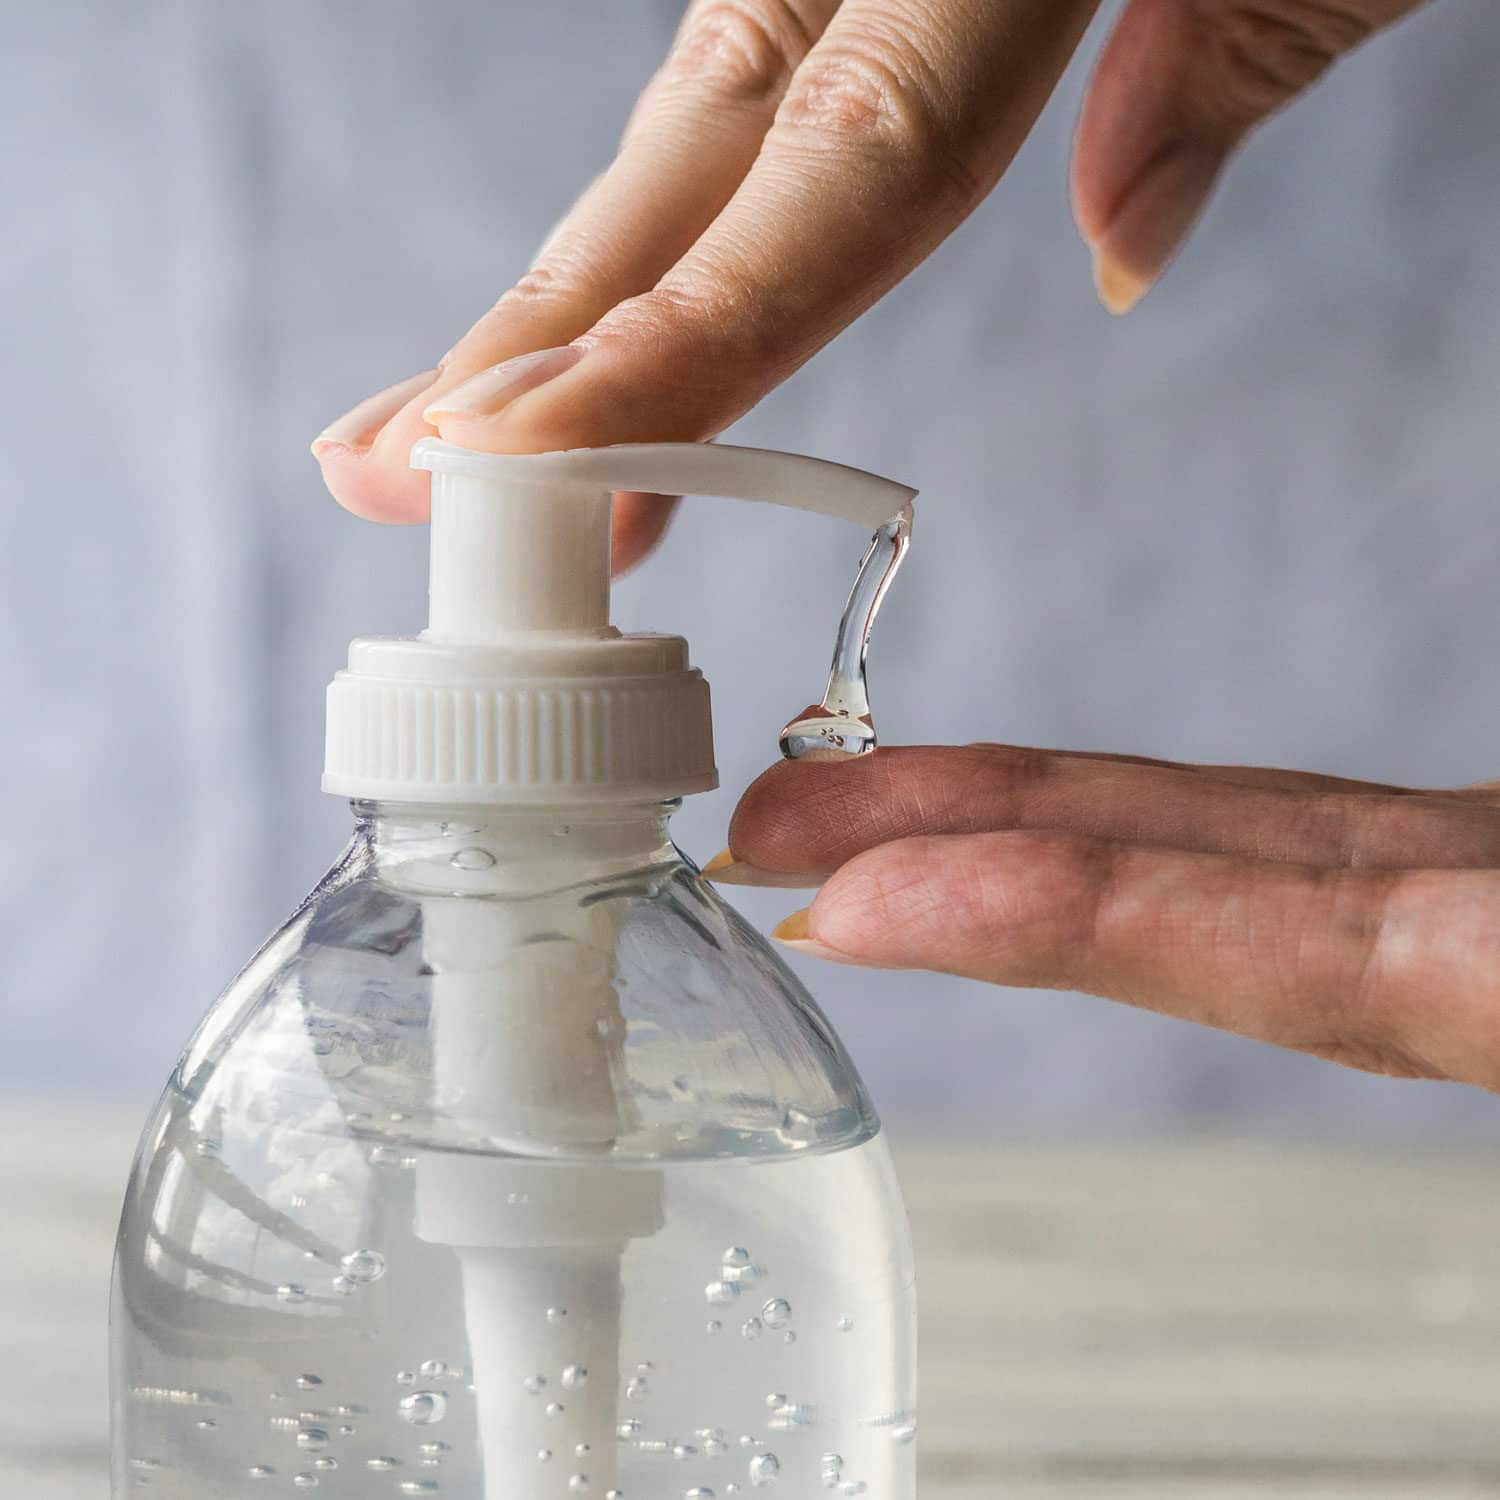 Is it a Food? Is it a Cosmetic?: No! FDA Reminds Consumers that Hand Sanitizers are Regulated as Over-the-Counter Drugs